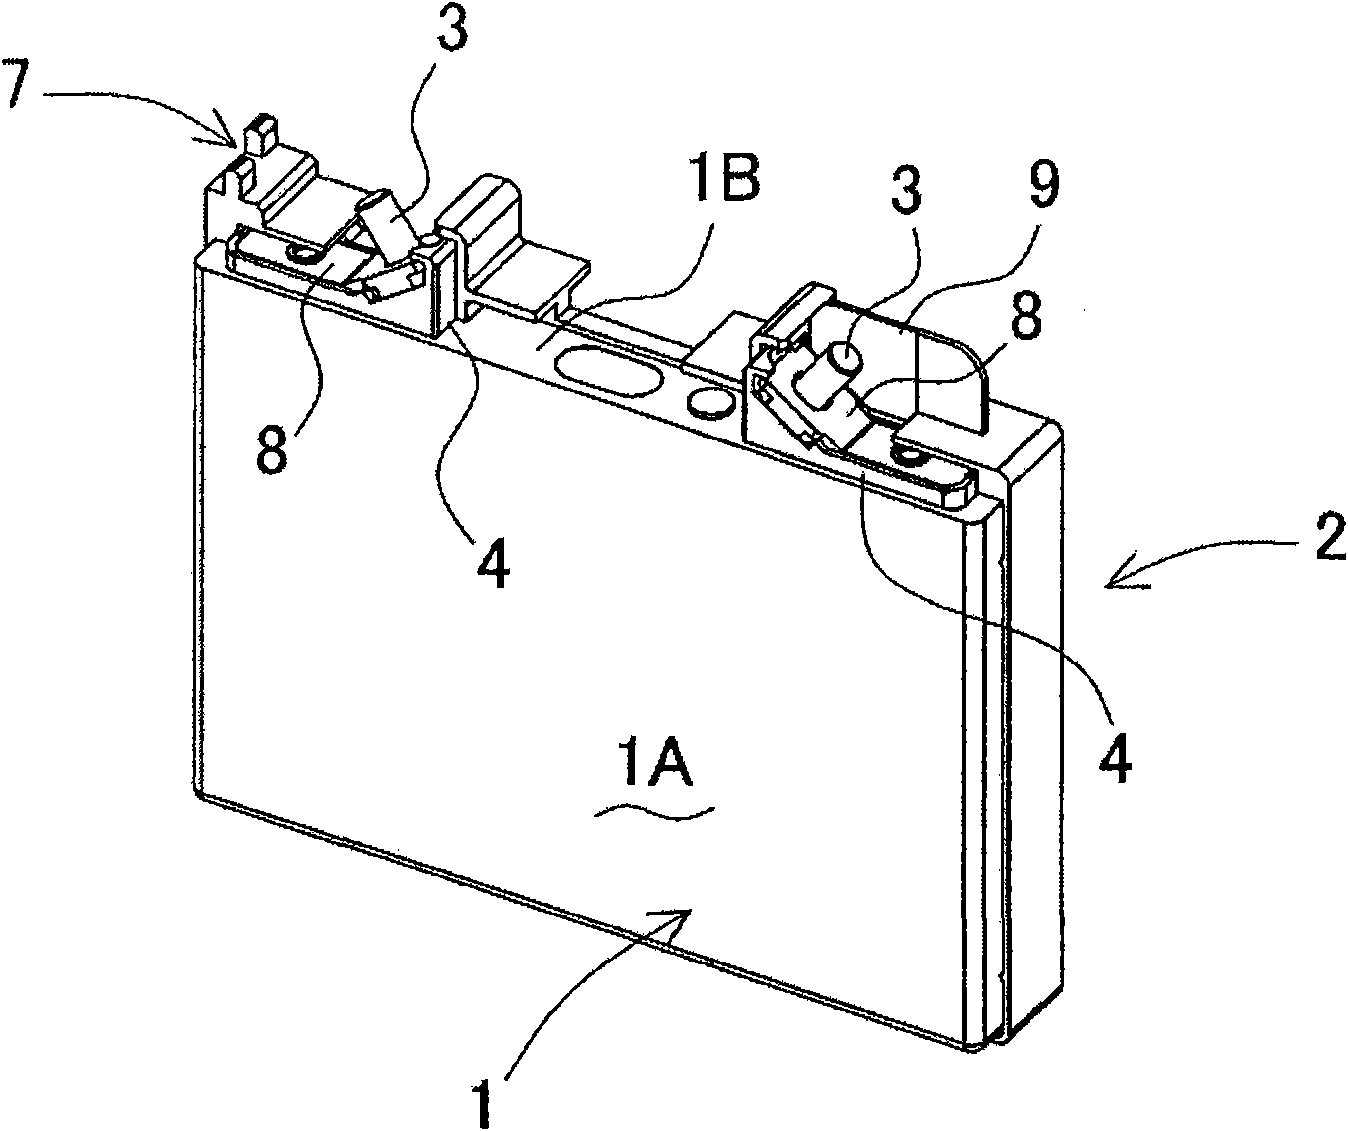 Battery array and battery array separator